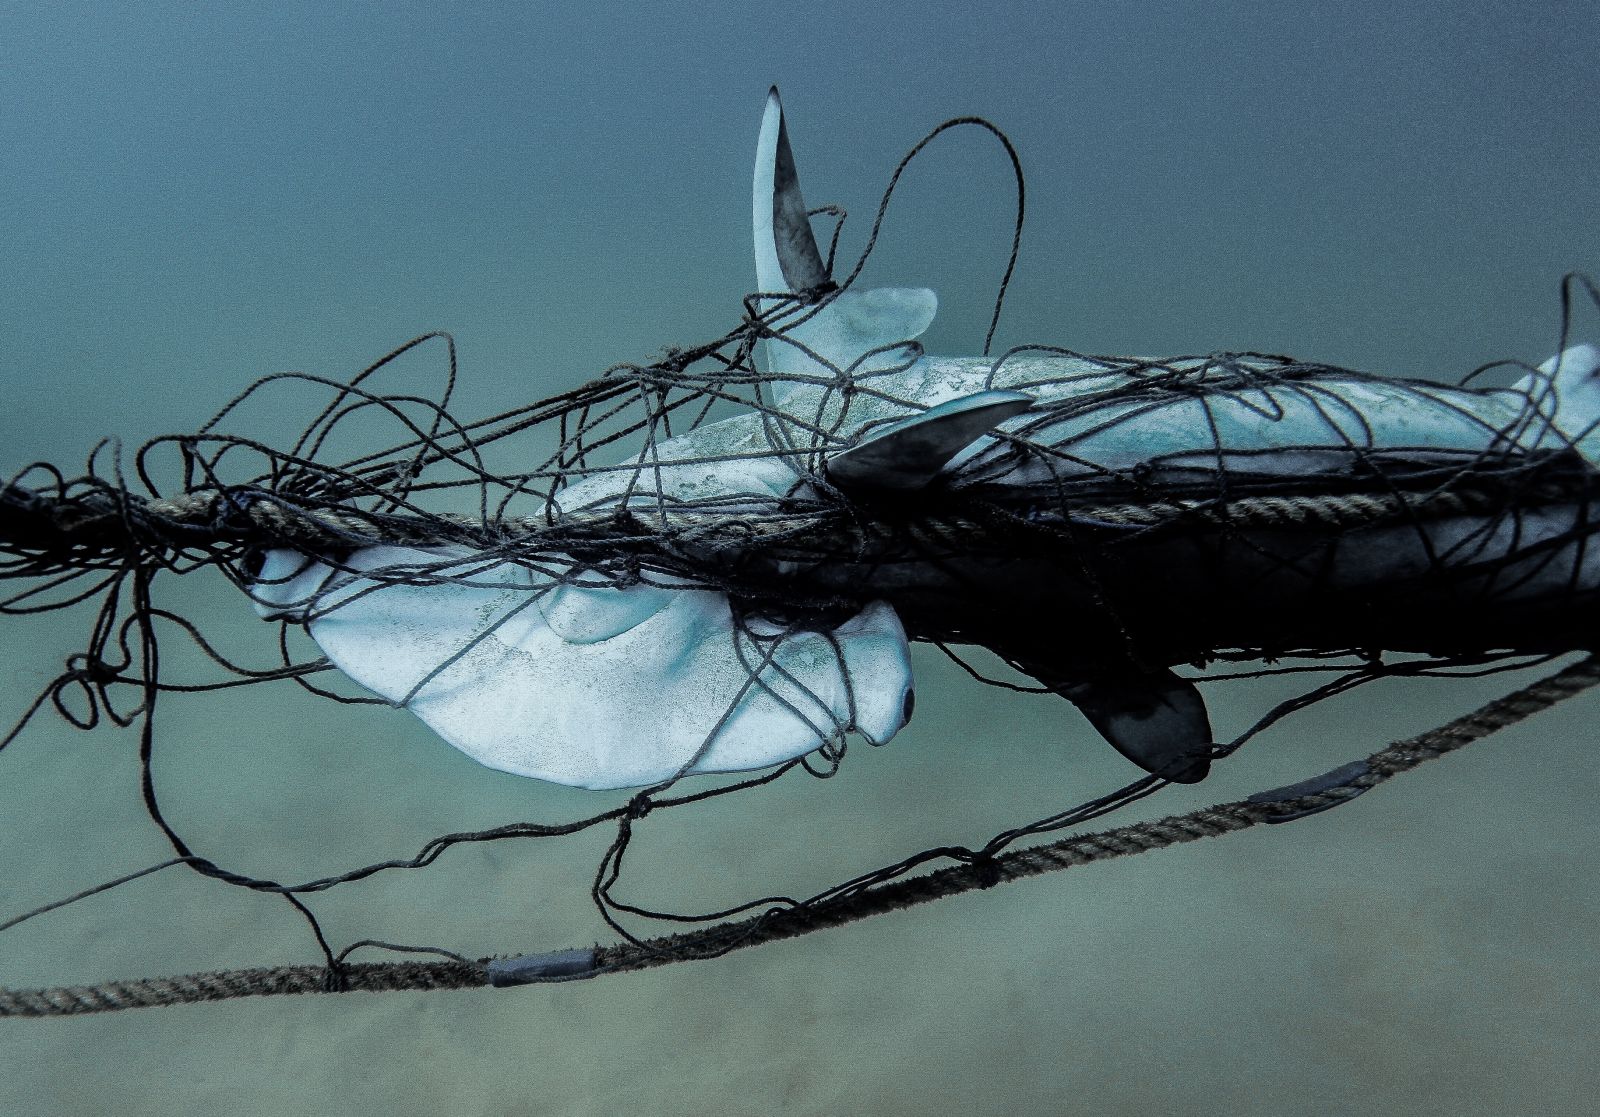 134 non-target animals, including turtles and dolphins, killed by NSW shark nets this season